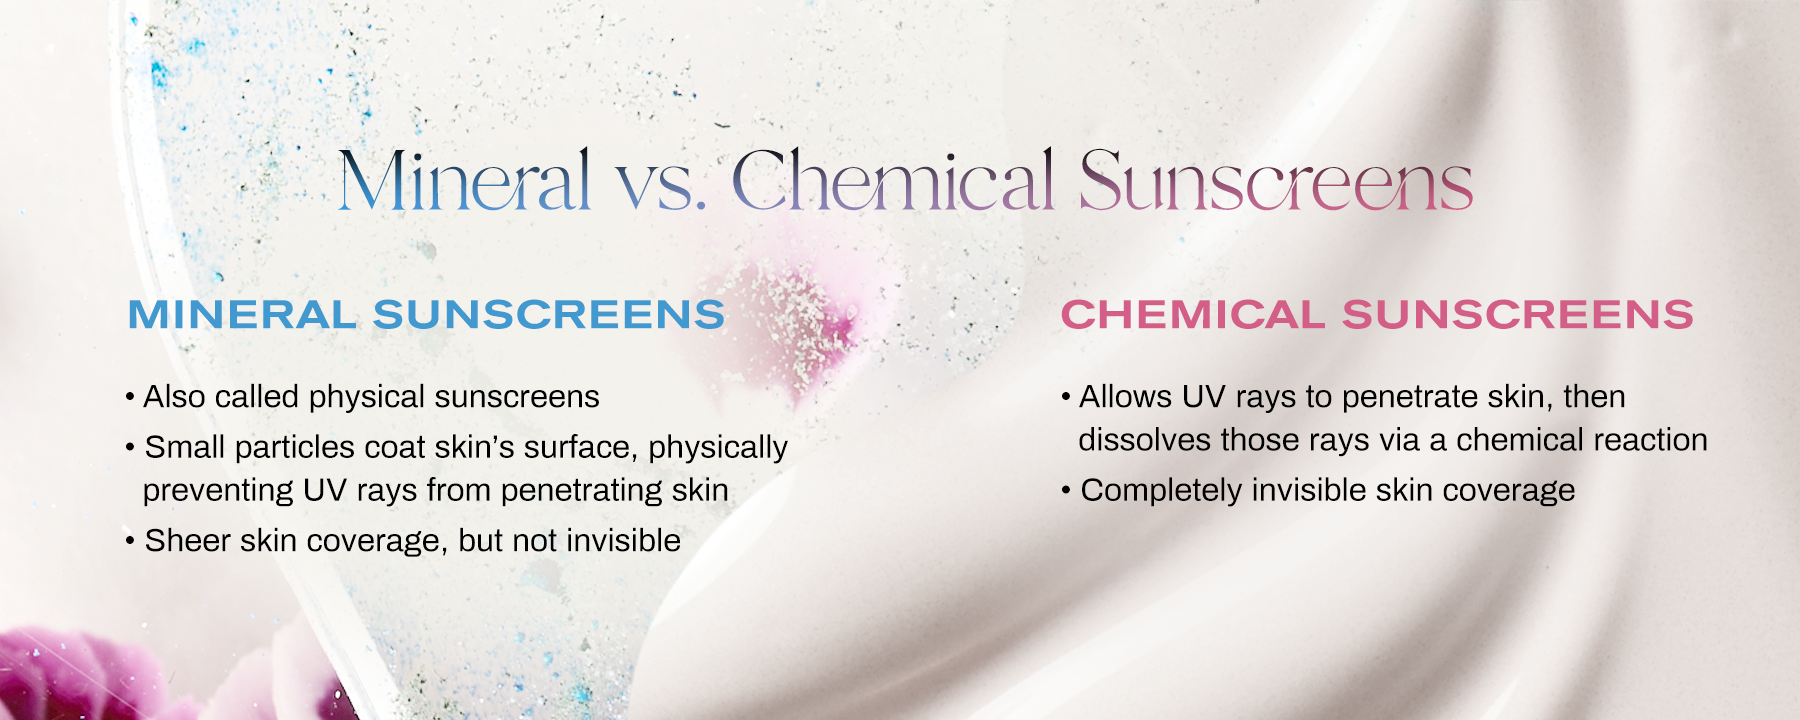 Image of Mineral vs Chemical Sunscreens | Mineral sunscreens are also called physical sunscreens. Small particles coat skin's surface, physically preventing UV rays from penetrating skin. Sheer in coverage, but not invisible. Chemical sunscreens allow UV rays to penetrate skin, then dissolves rays via a chemical reaction. Completely invisible skin coverage. 